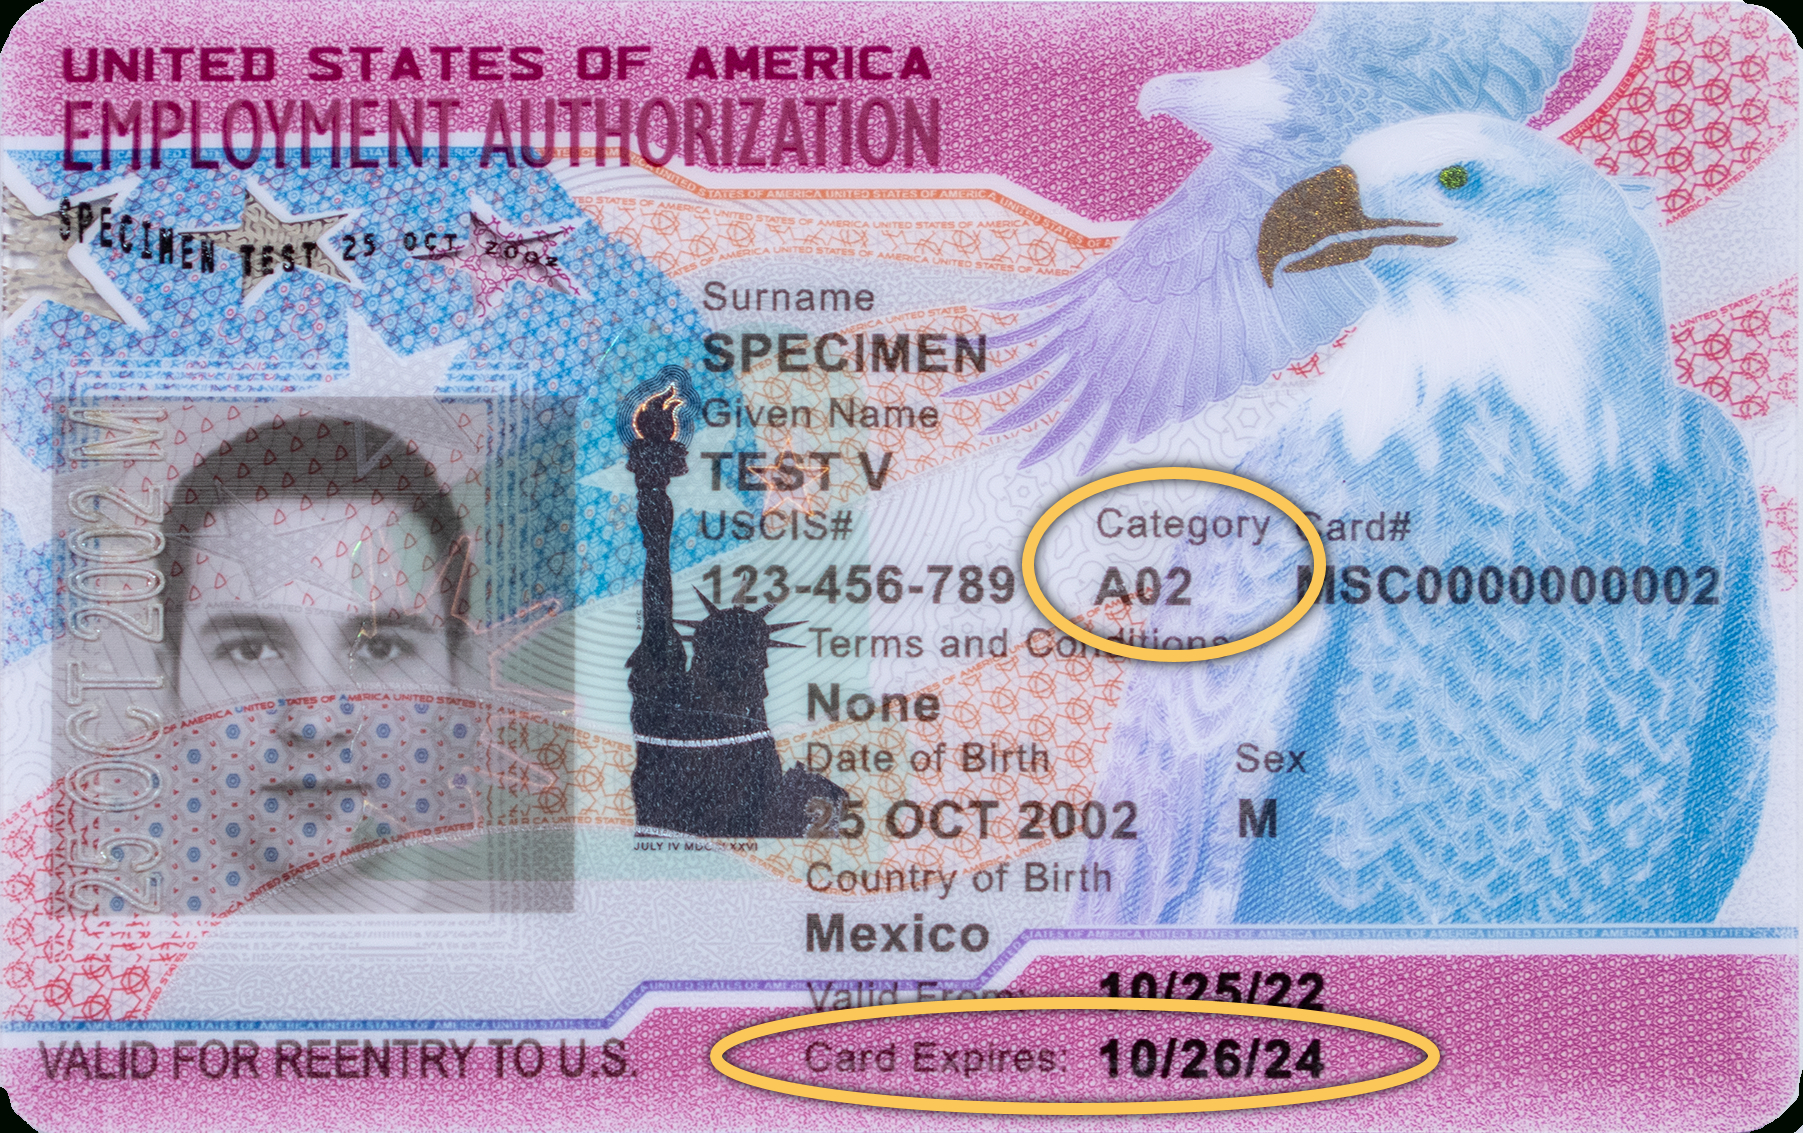 5.0 Automatic Extensions Of Employment Authorization And/Or for What Is An Uscis I-9 Form?